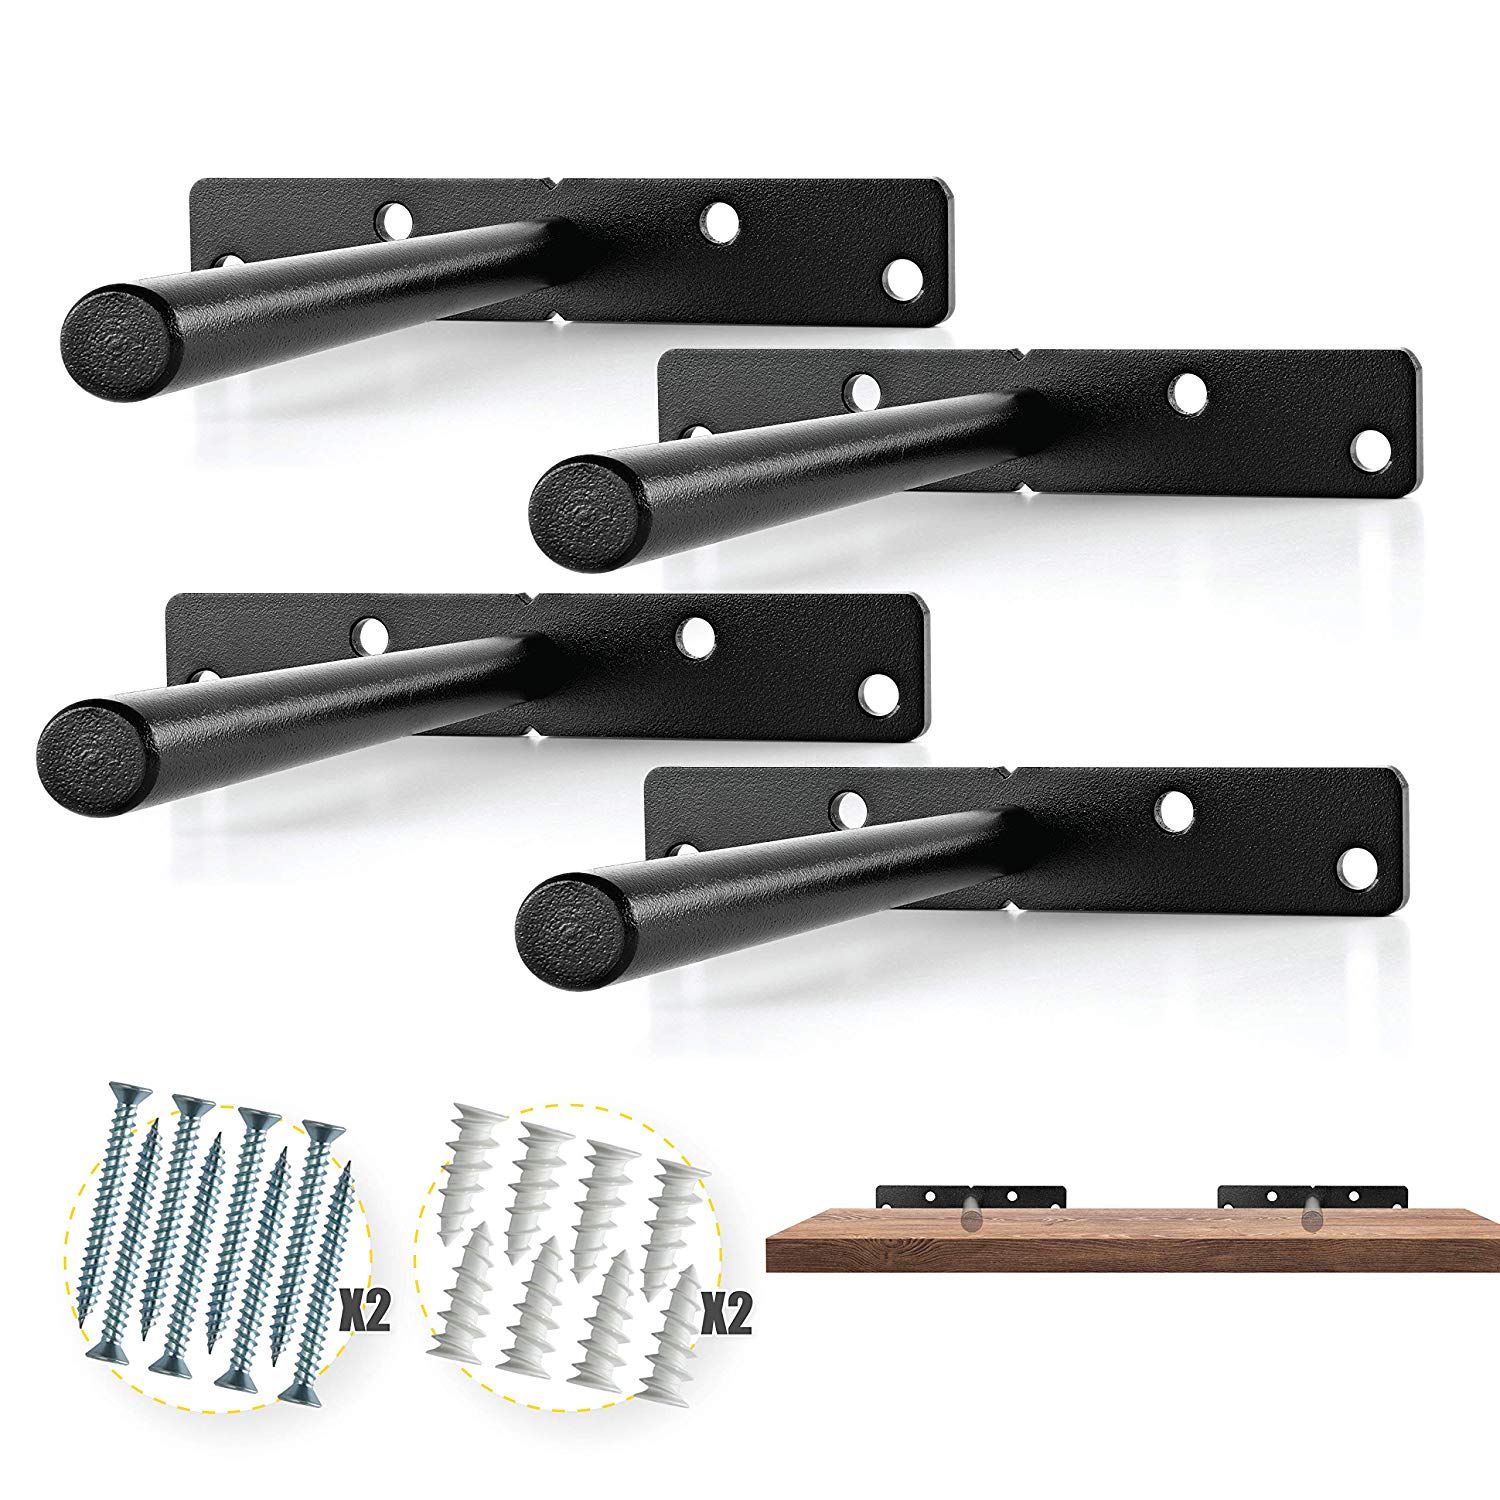 heavy duty floating shelf bracket pcs solid steel blind brackets supports hidden for wood shelves screws and wall plugs included towel over toilet decorative mounted coat racks